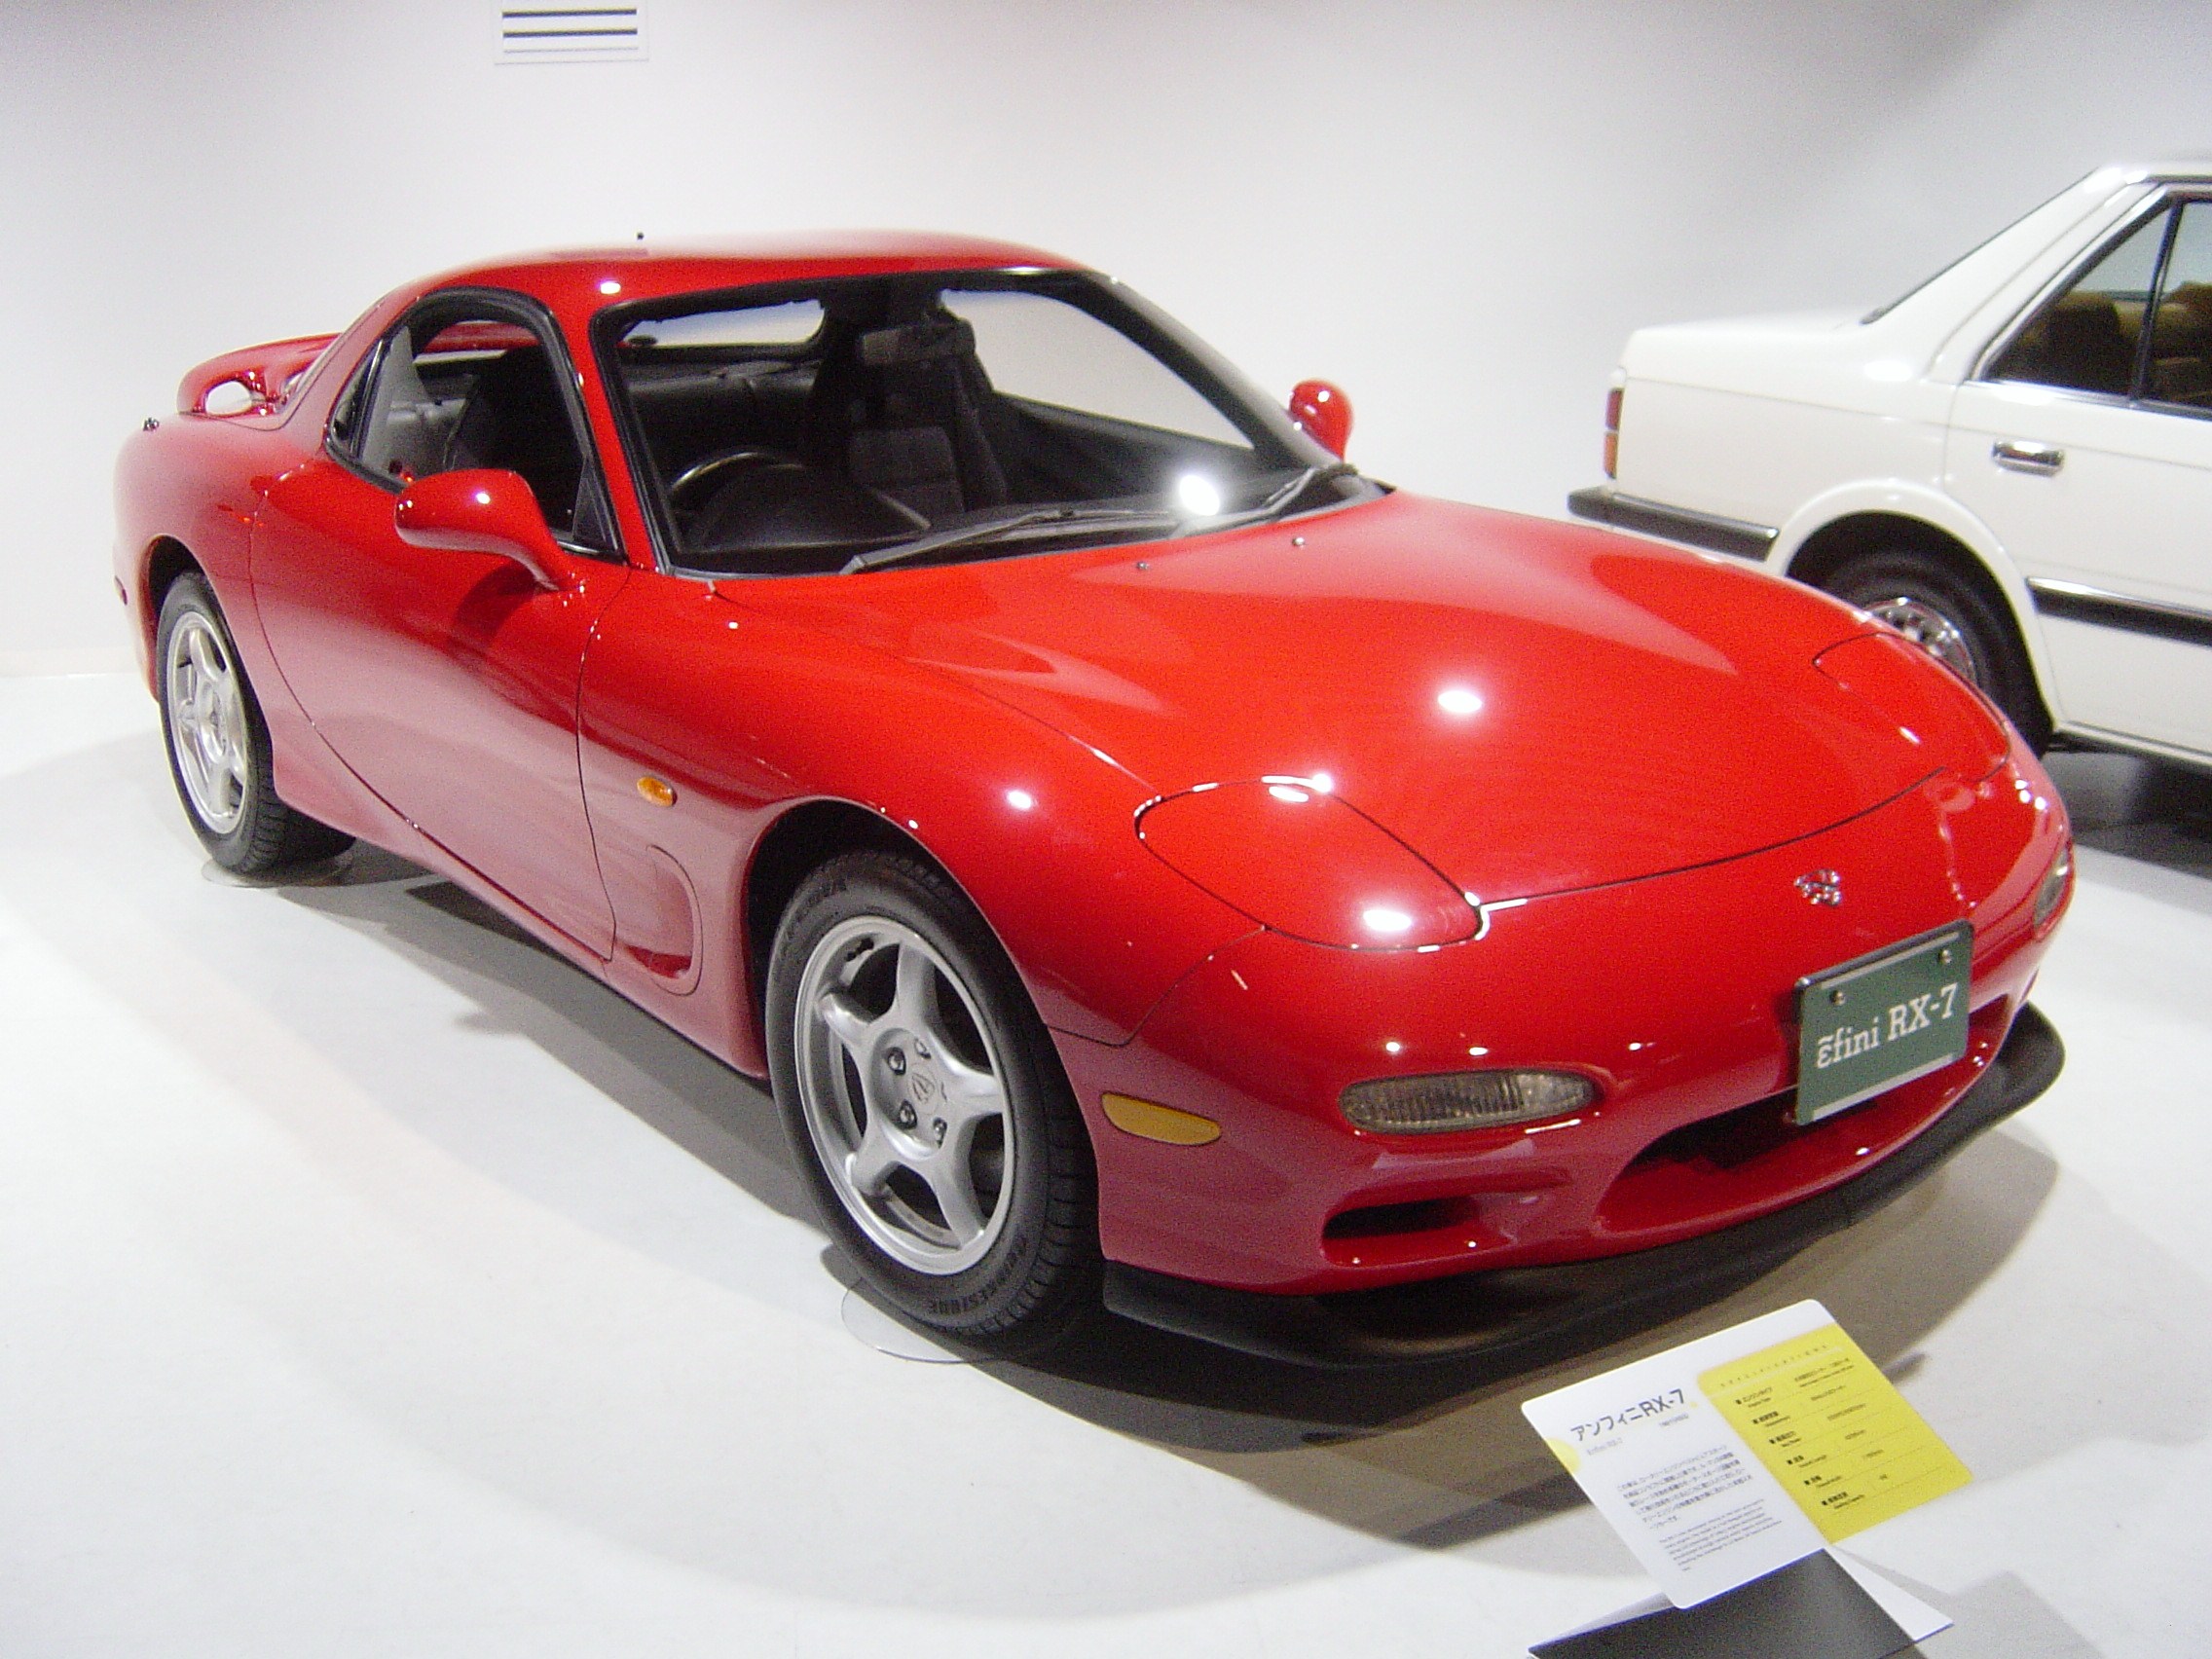 Mazda RX-7 FD The third generation of the RX-7 (FD) featured an all new